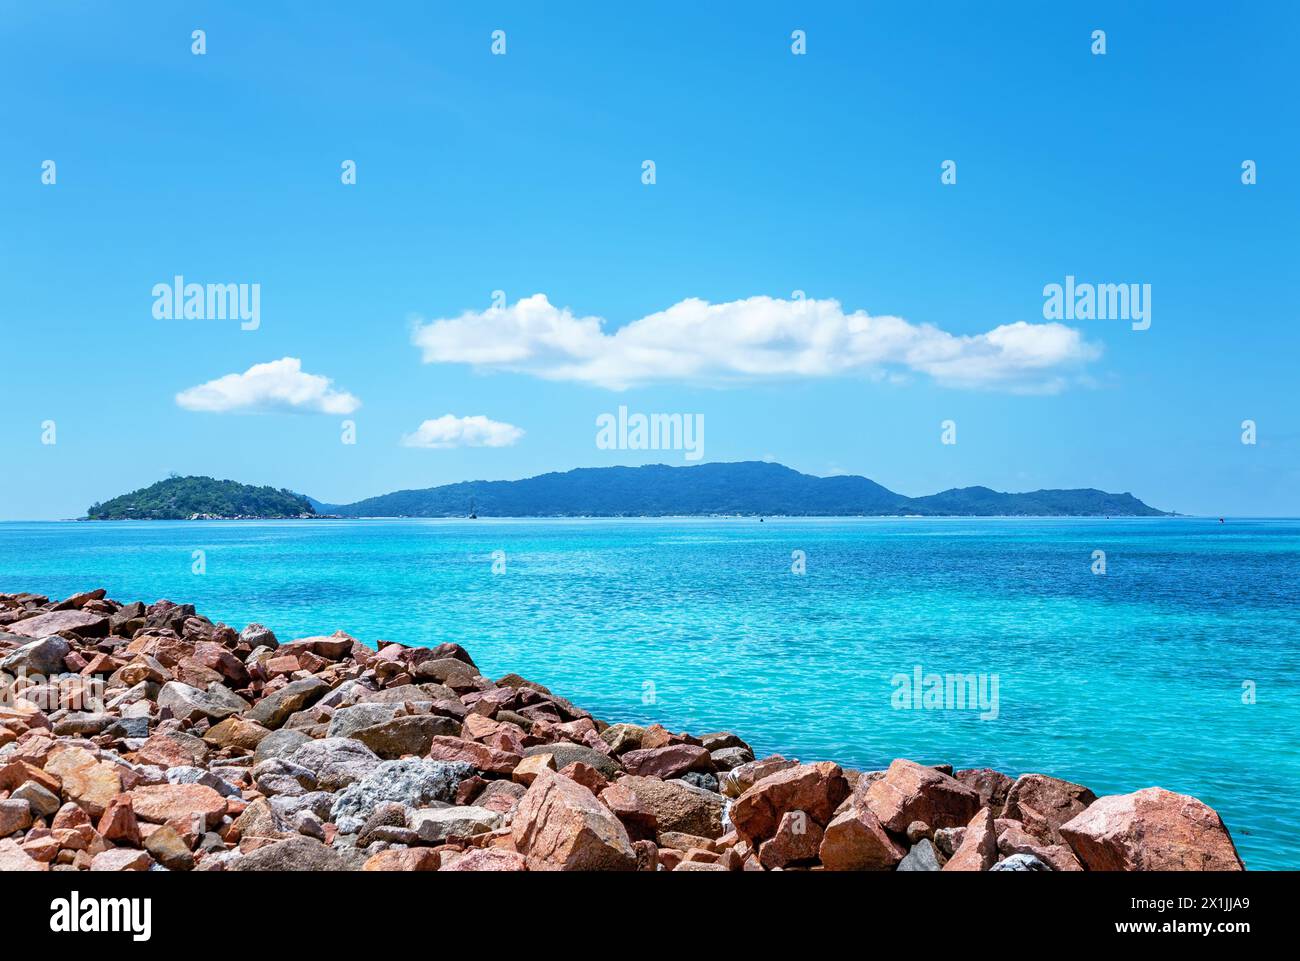 Island Ile Ronde on the left, Island Praslin in the background, seen from Island La Digue. Stock Photo